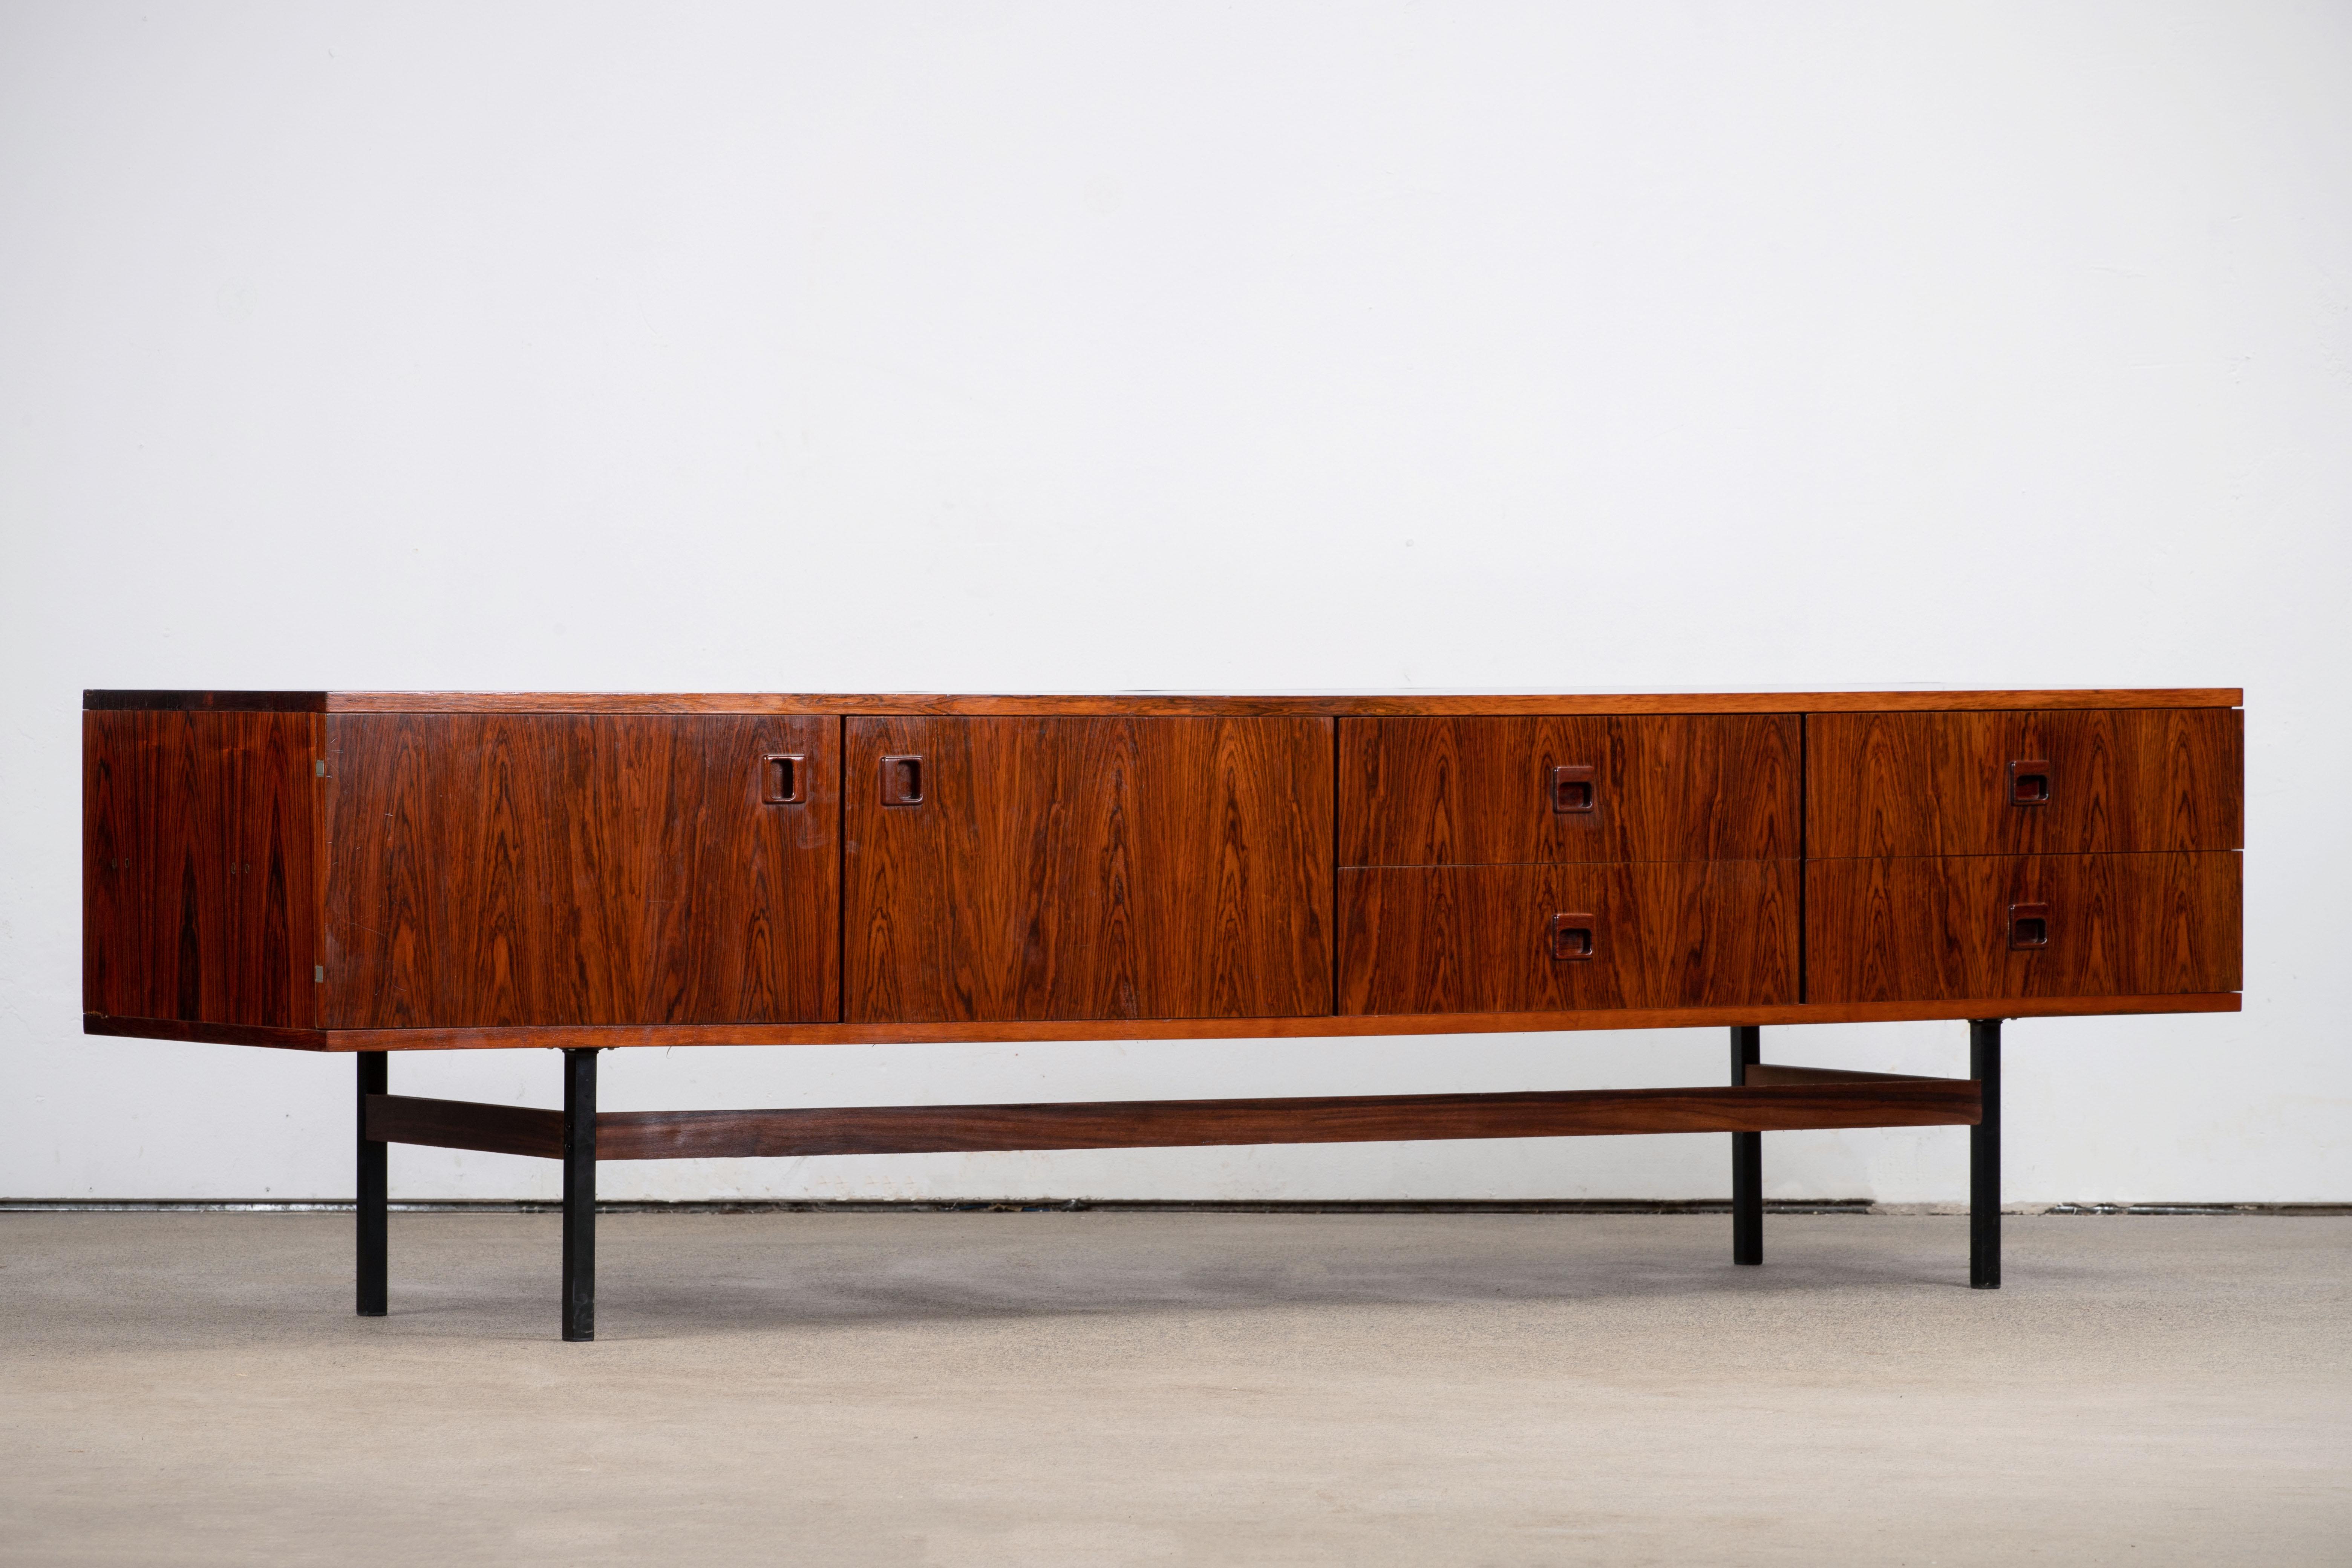 Mid-century Cocobolo sideboard from the 1960s. It is a shining example of the form and function synonymous with furniture of this era. Well-built, great design and lightness. Three drawers storage space. The minimal design and the warm tone combined